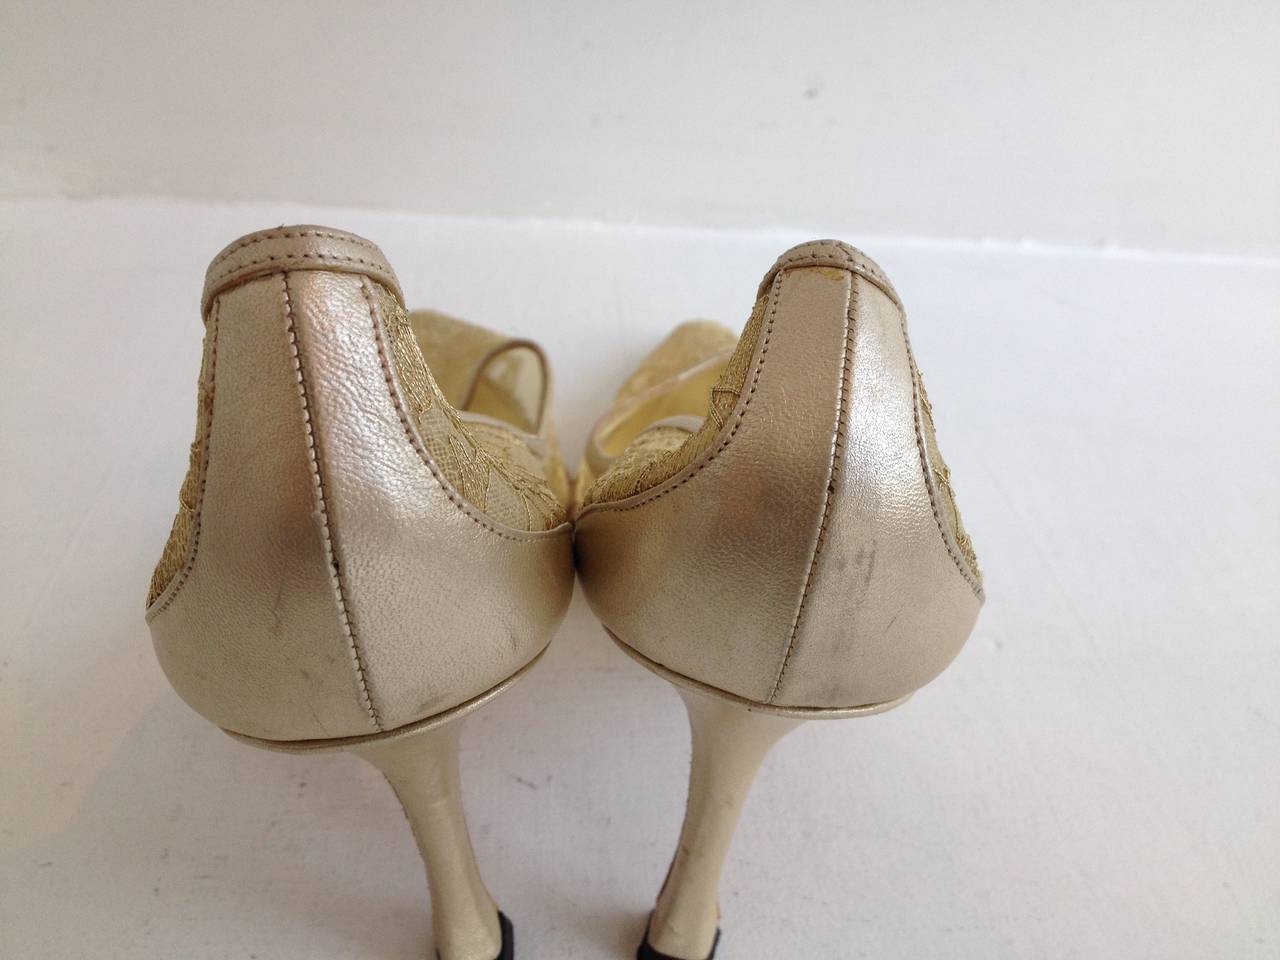 Women's Manolo Blahnik Gold Leather and Lace Heels